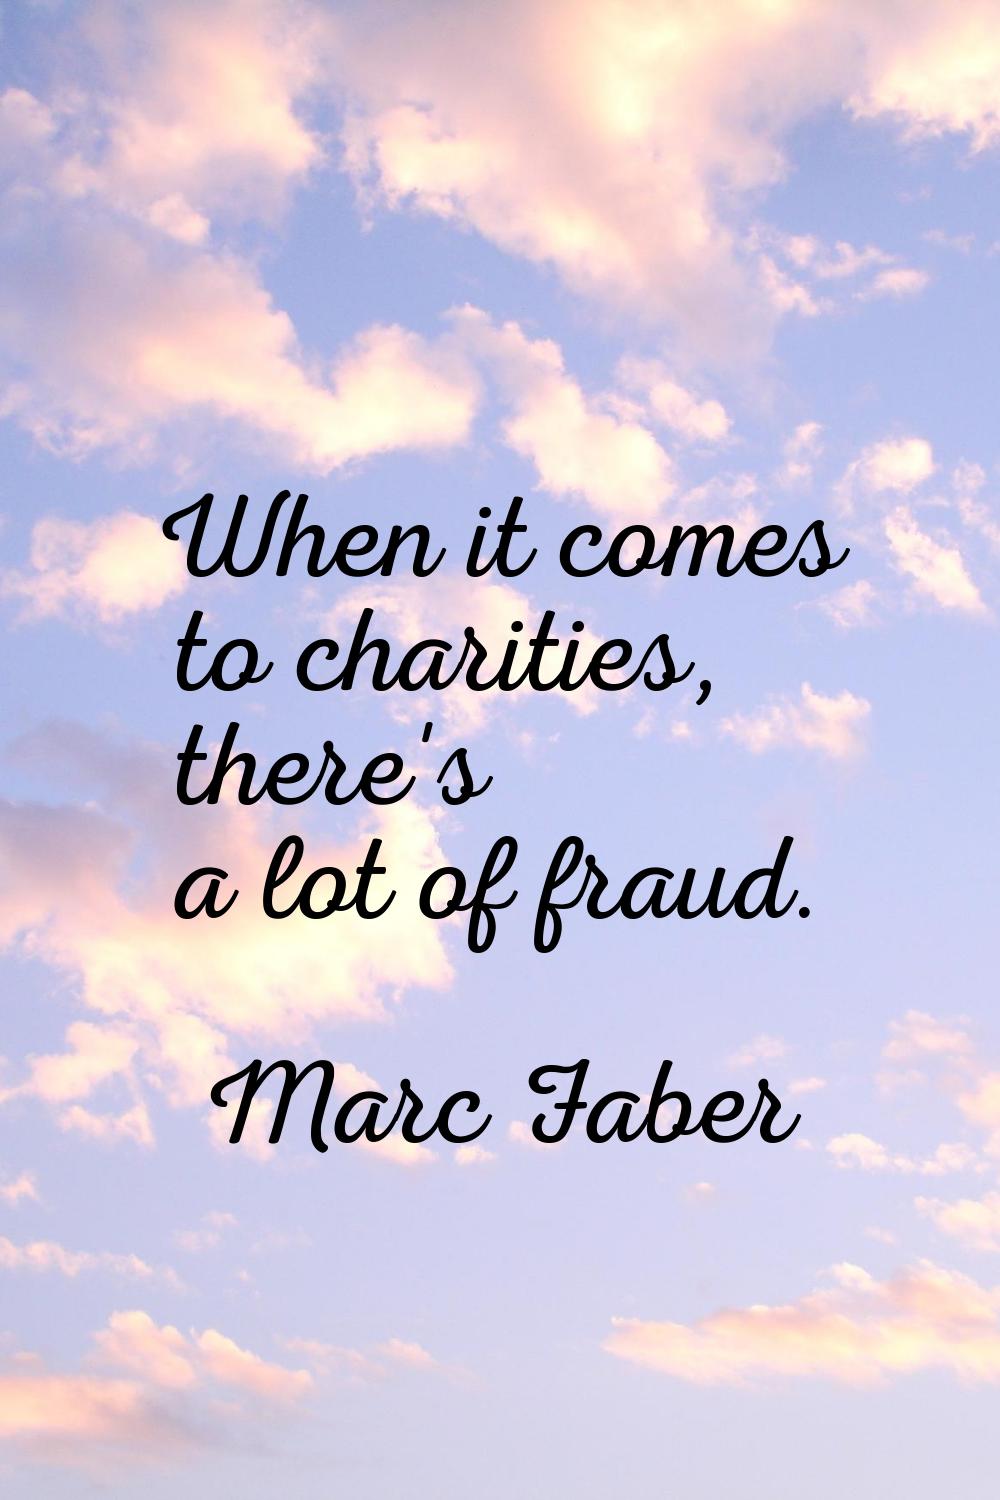 When it comes to charities, there's a lot of fraud.